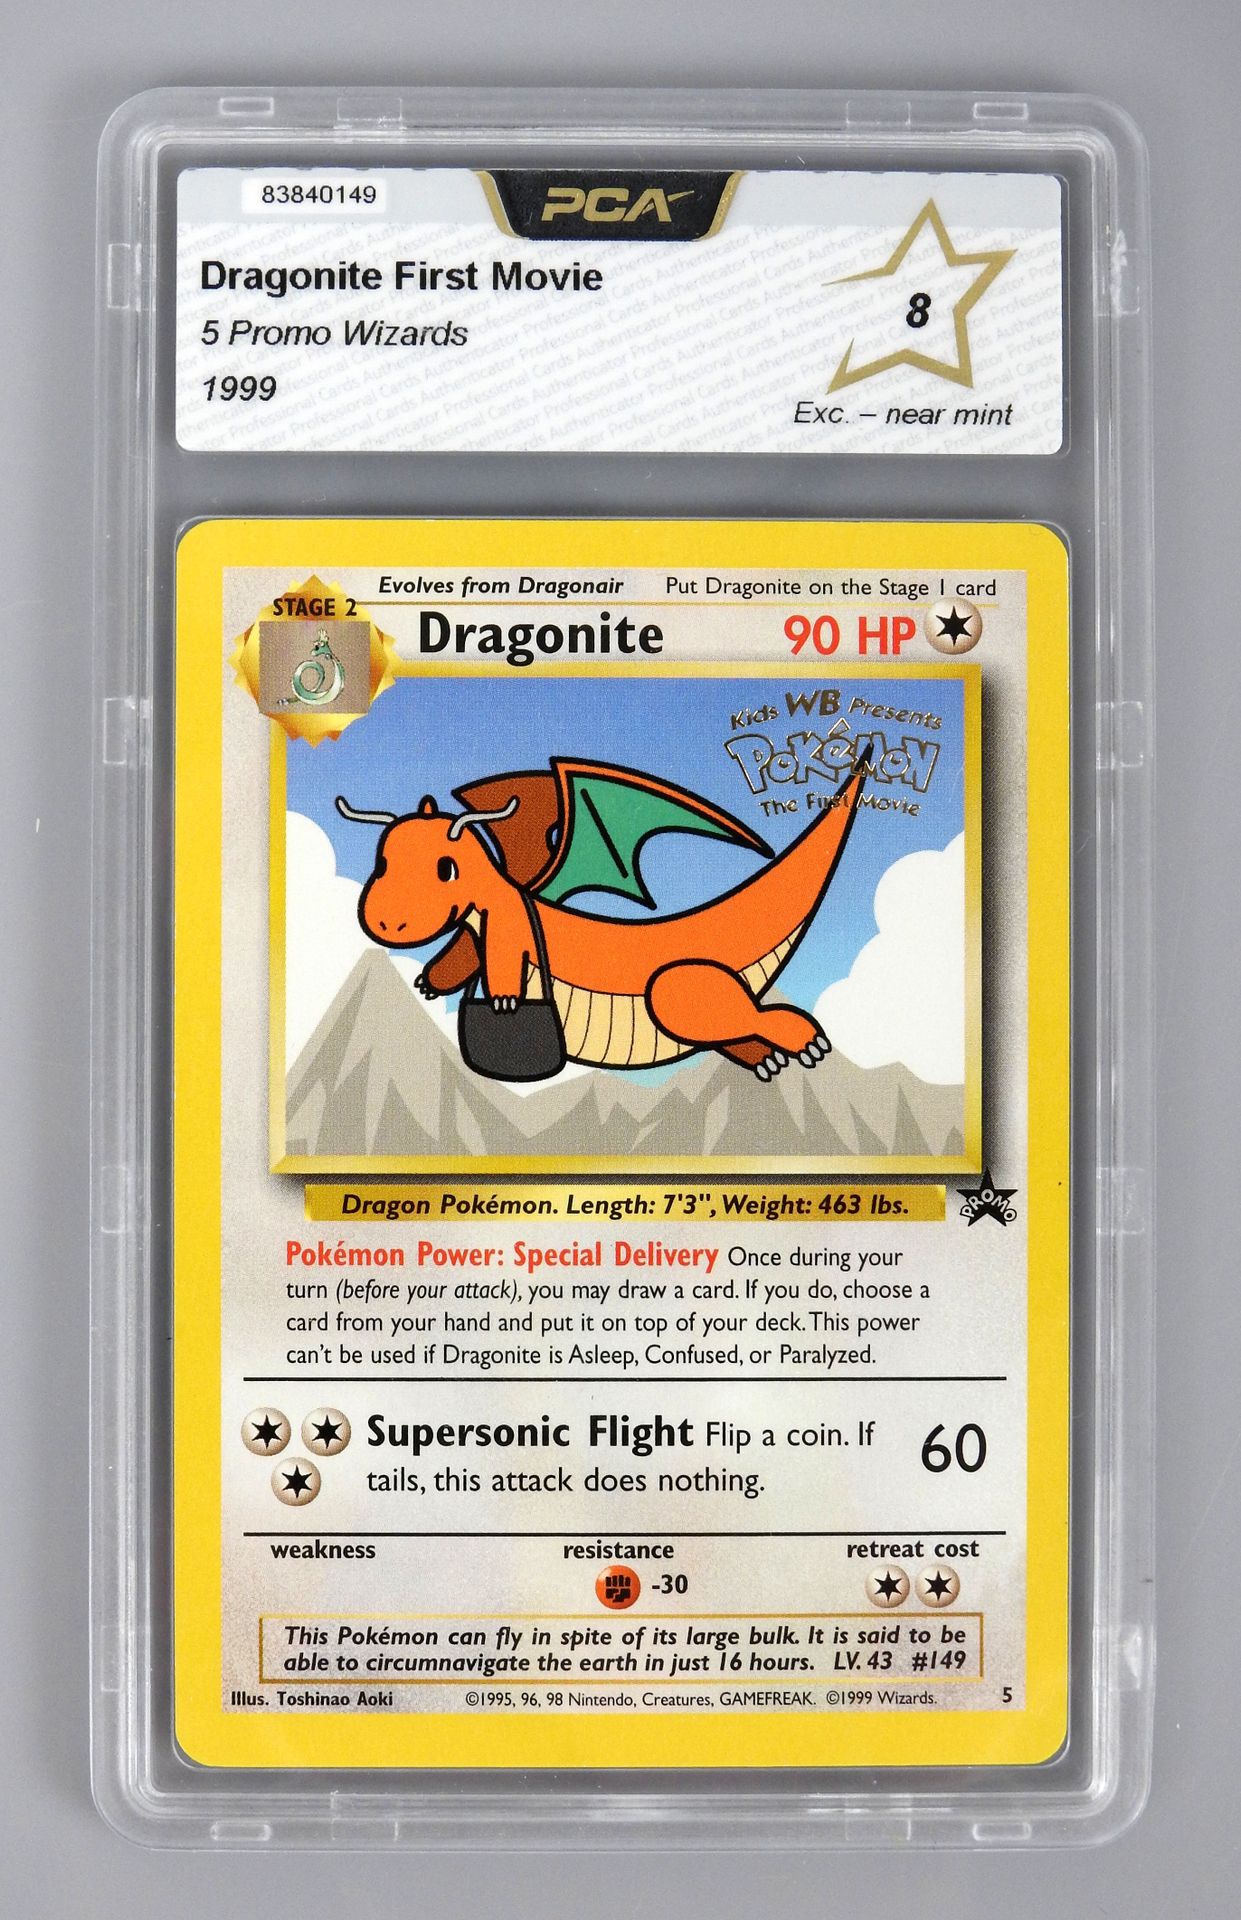 Null DRAGONITE FIRST MOVIE

Rare promo card with Warner Bross stamp for the rele&hellip;